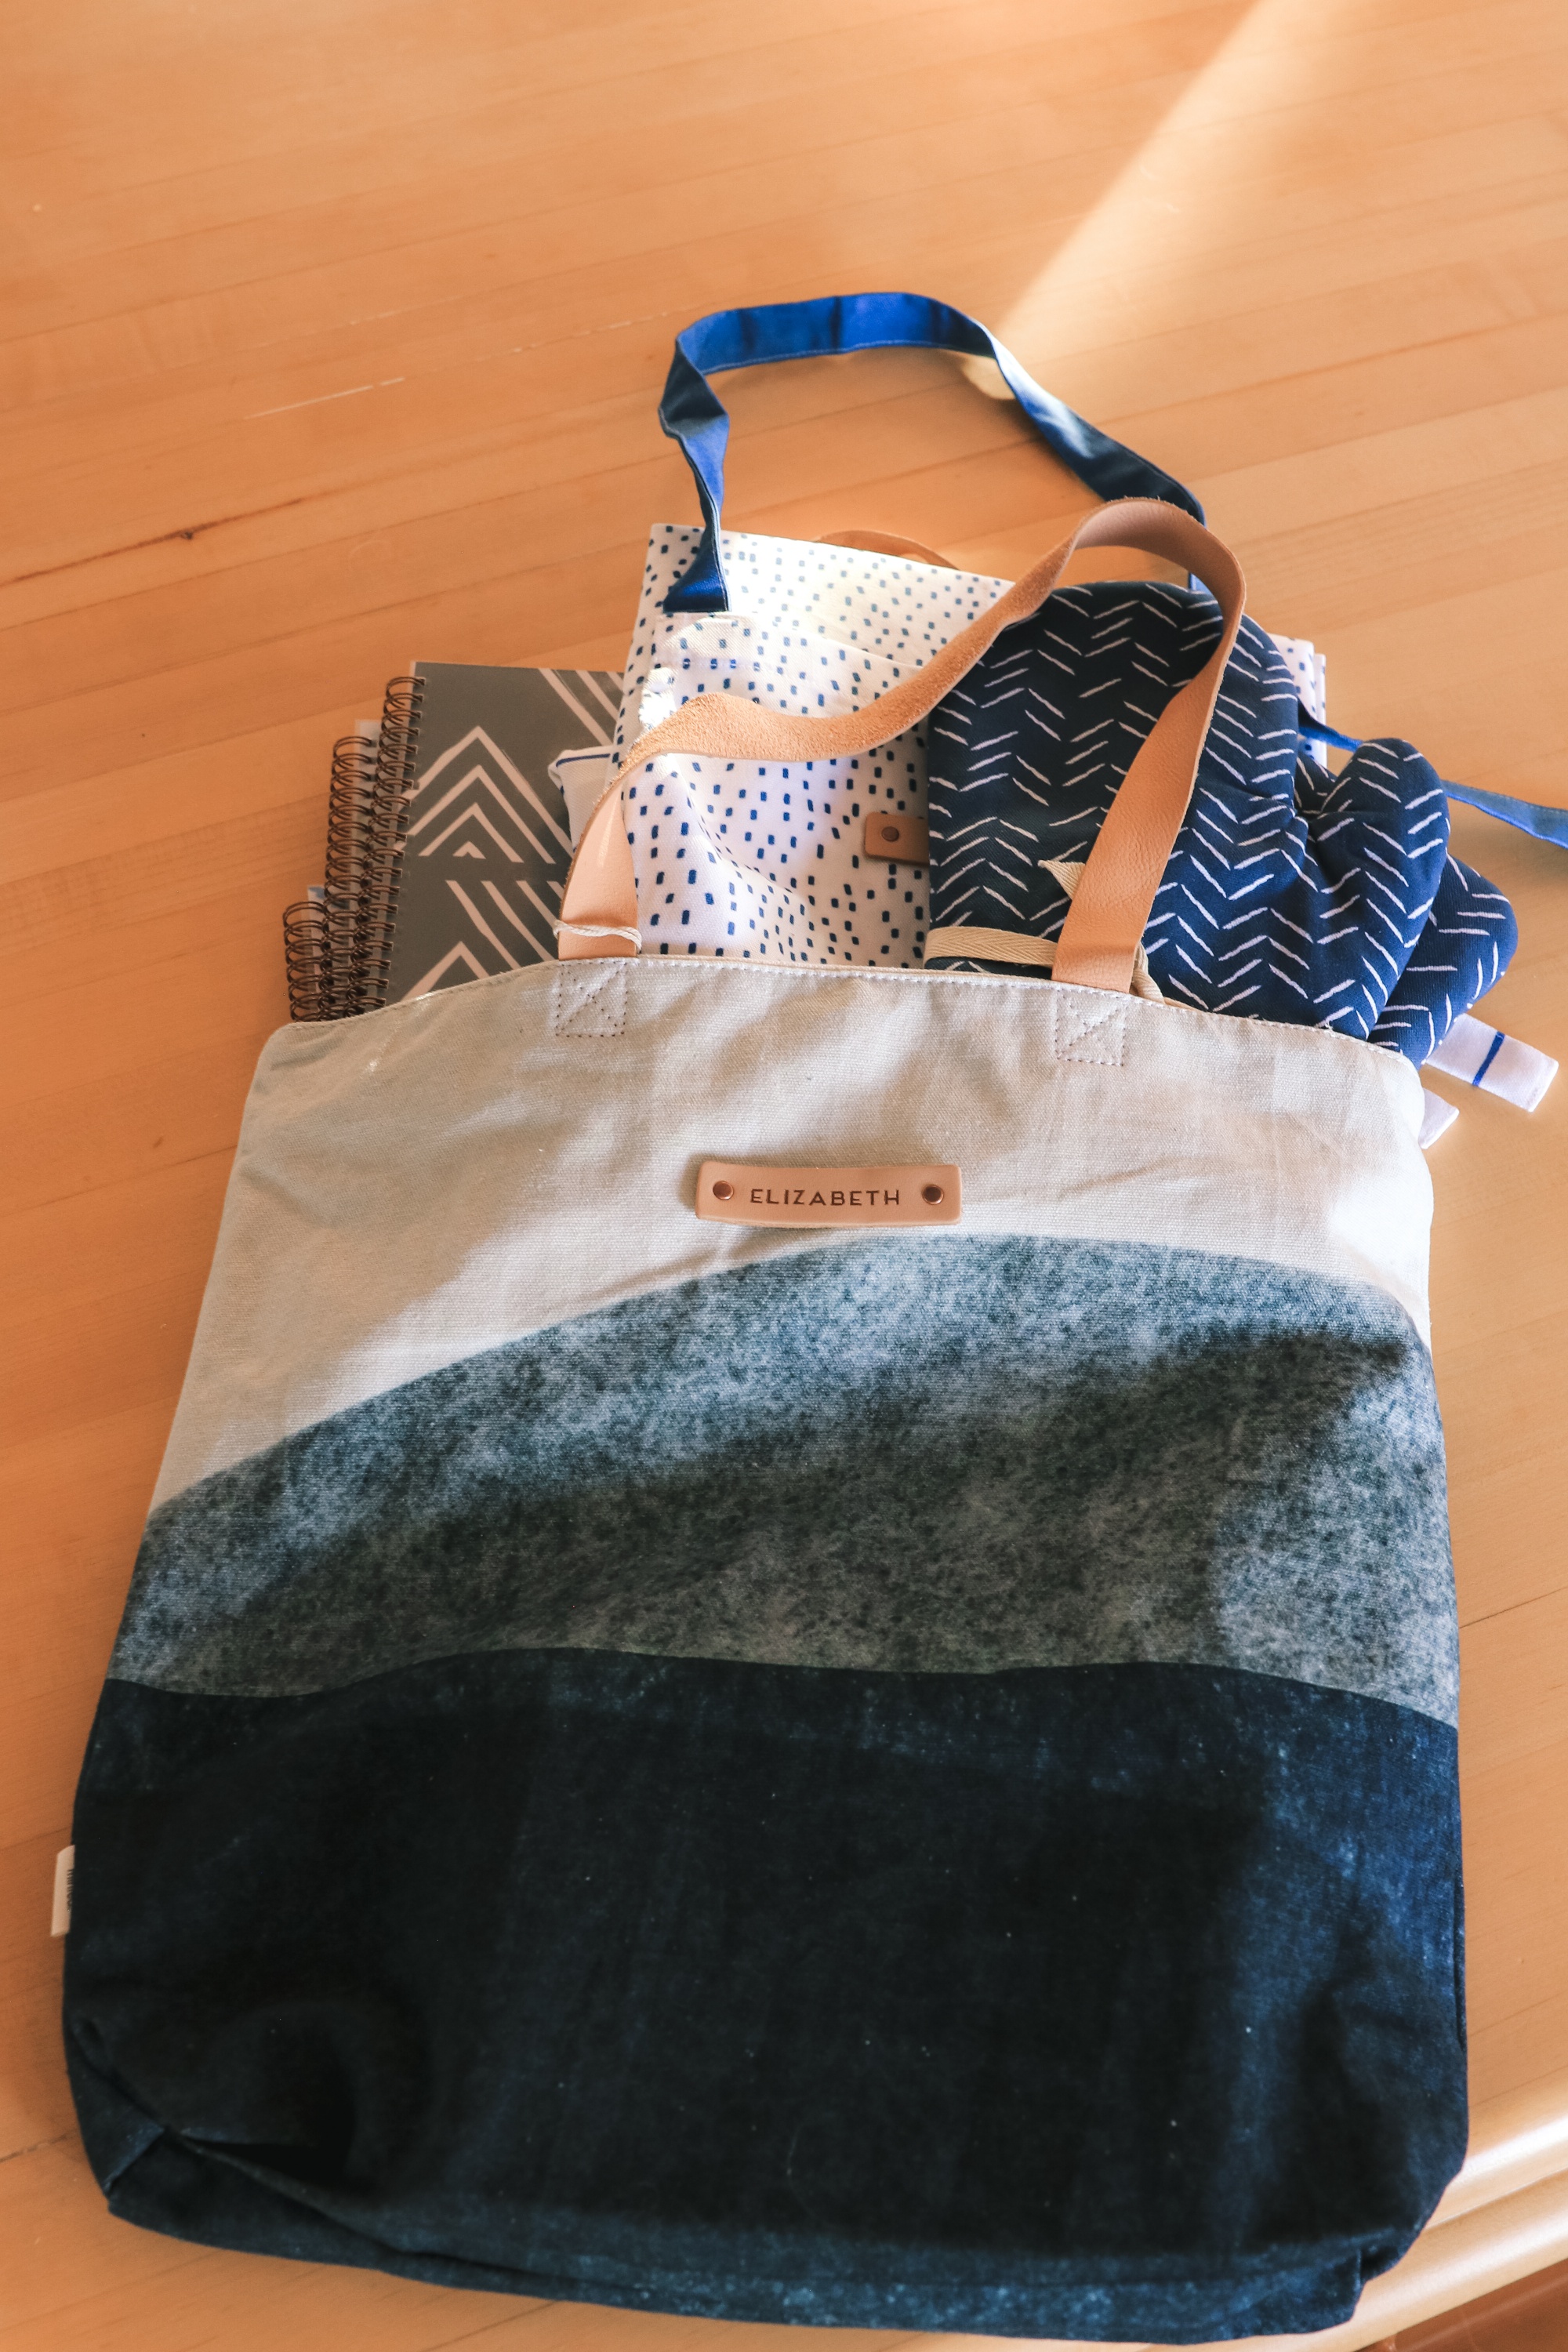 Personalized Gifts, Erin Busbee of Busbee Style sharing a blue and white personalized tote bag with three personalized planners, oven mitts, and aprons from Minted in Telluride, Colorado